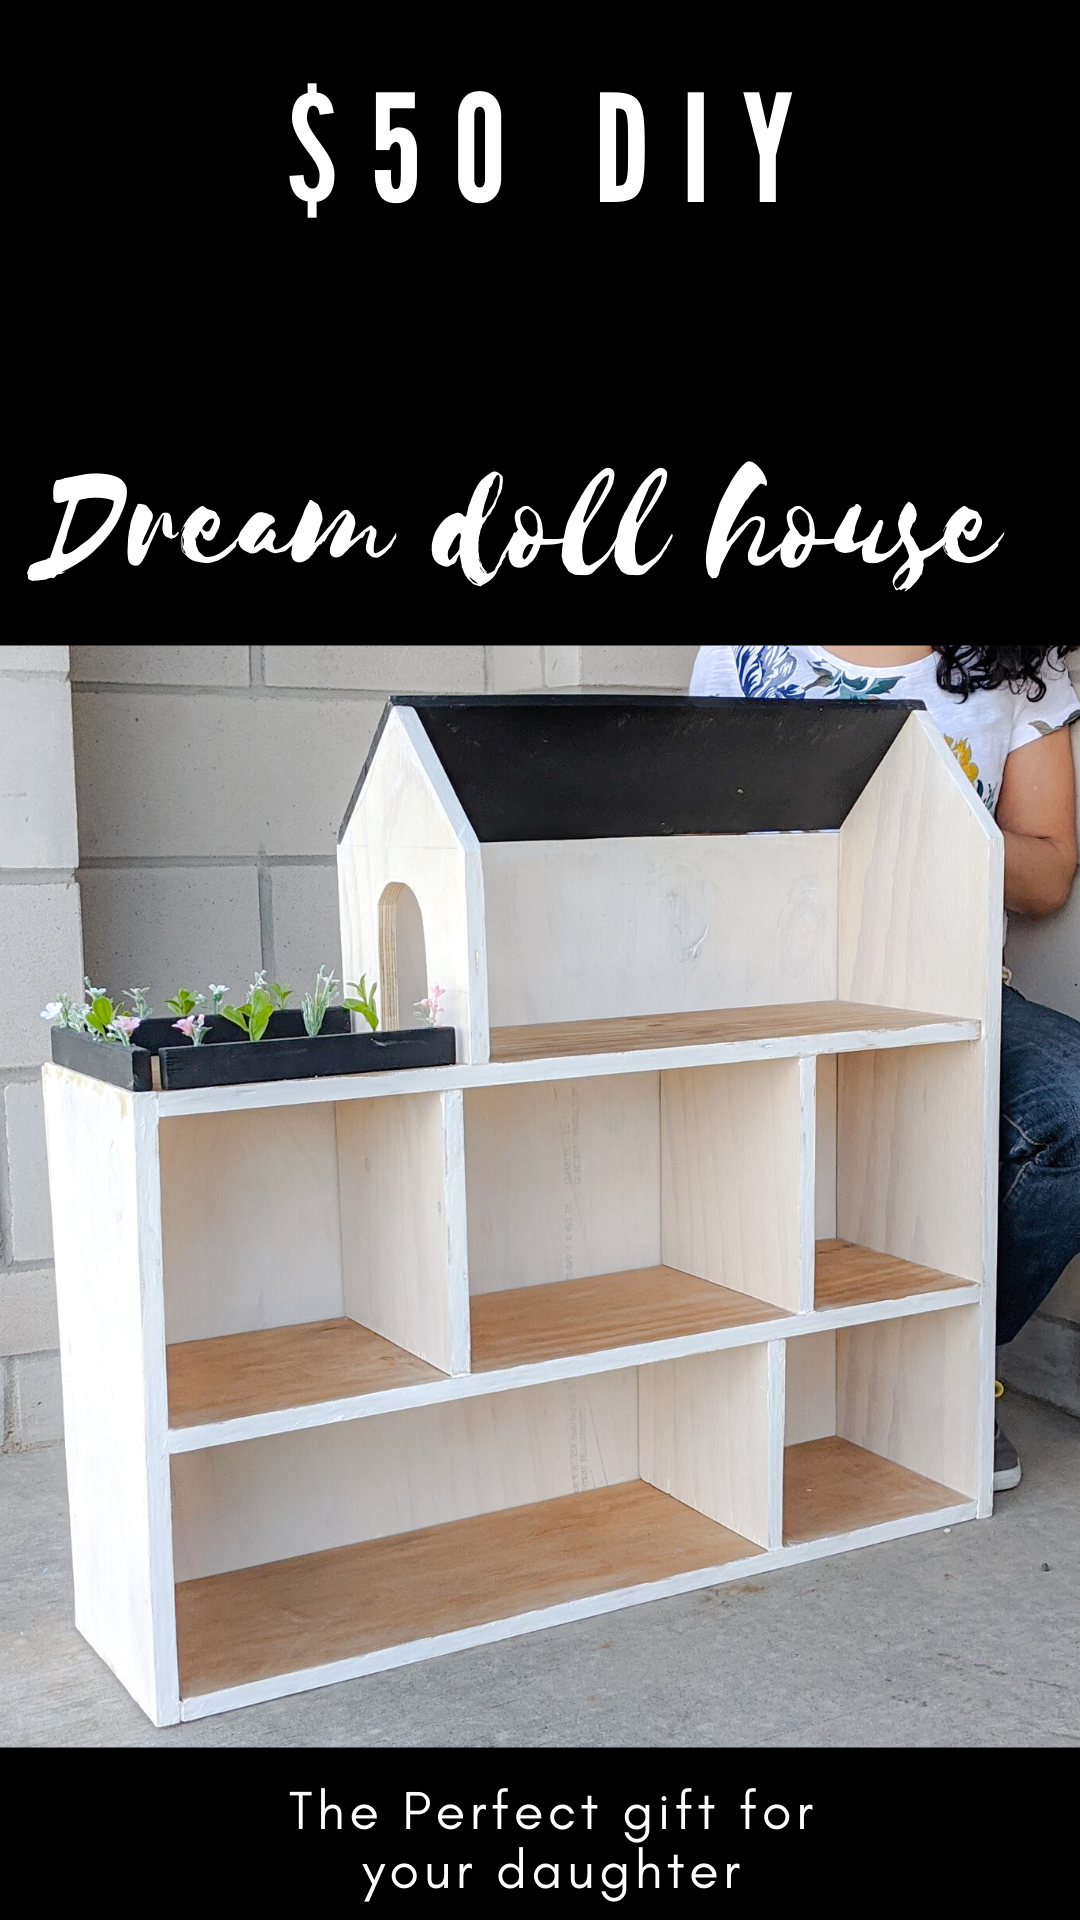 Completed, Finished and ON SALE NOW  Doll house plans, Doll house,  Miniature houses